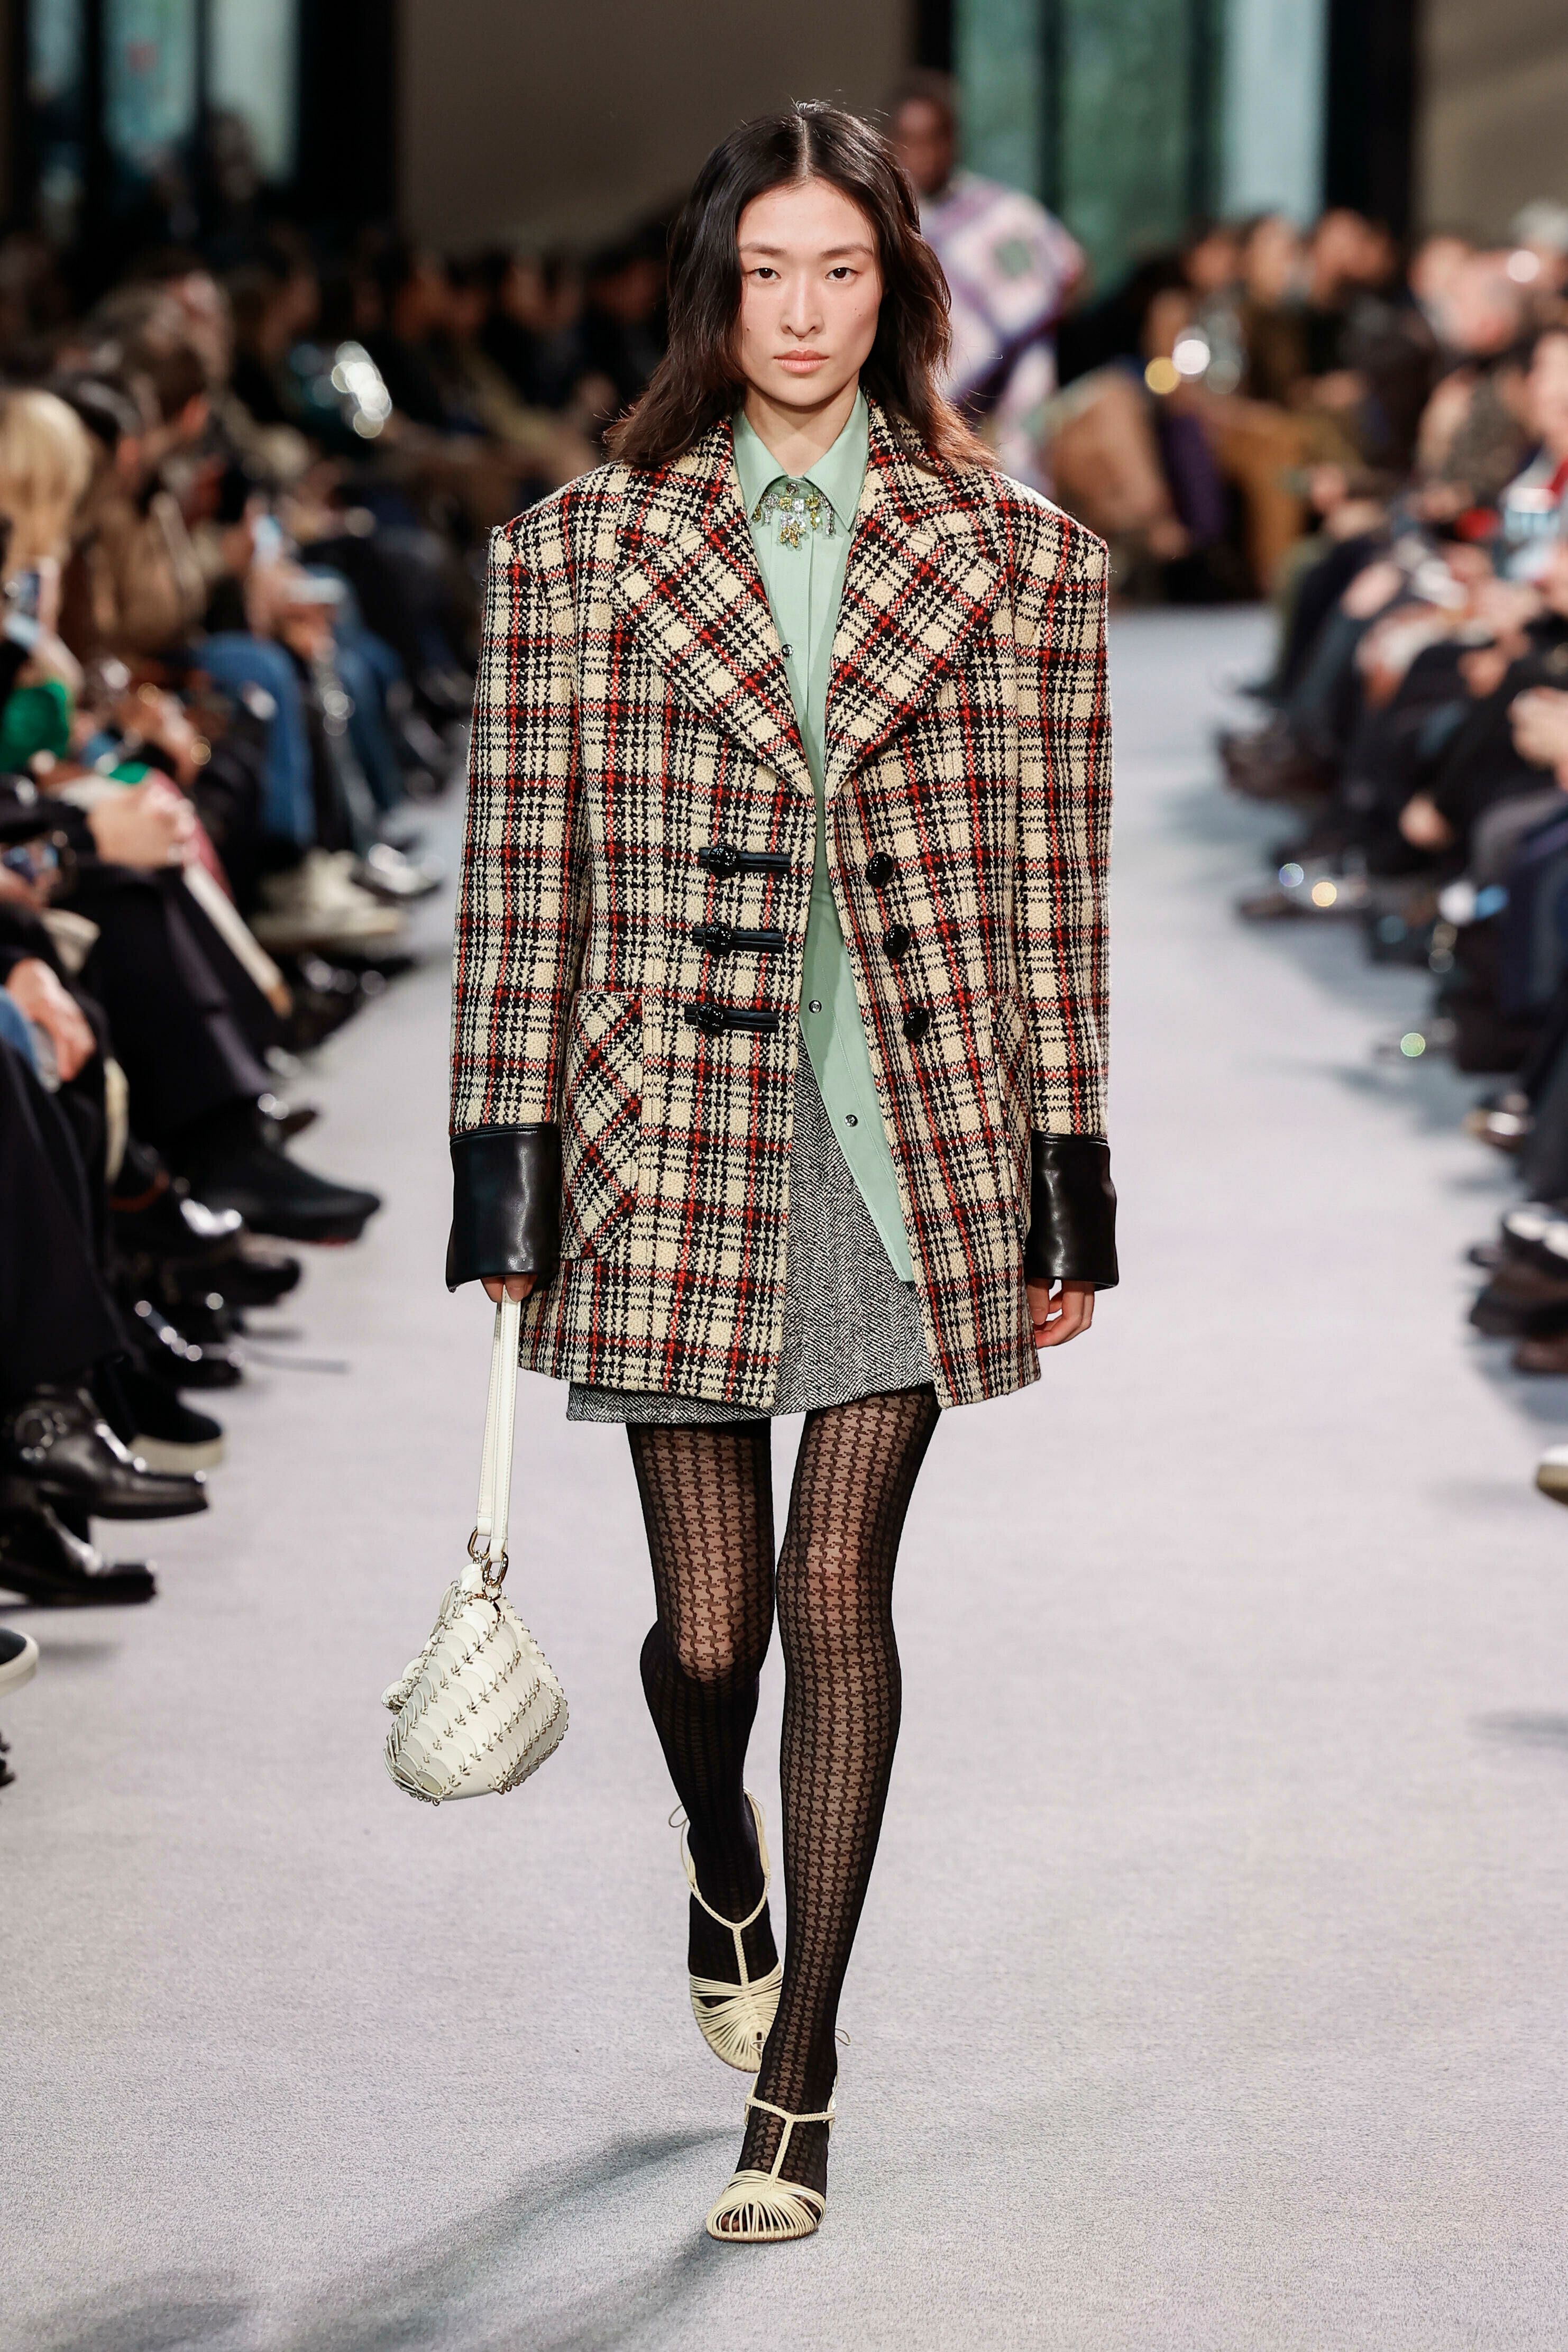 Equally at Rabanne, tartan blazers were given a grungier edge with leather-trimmed sleeves and fasteners.